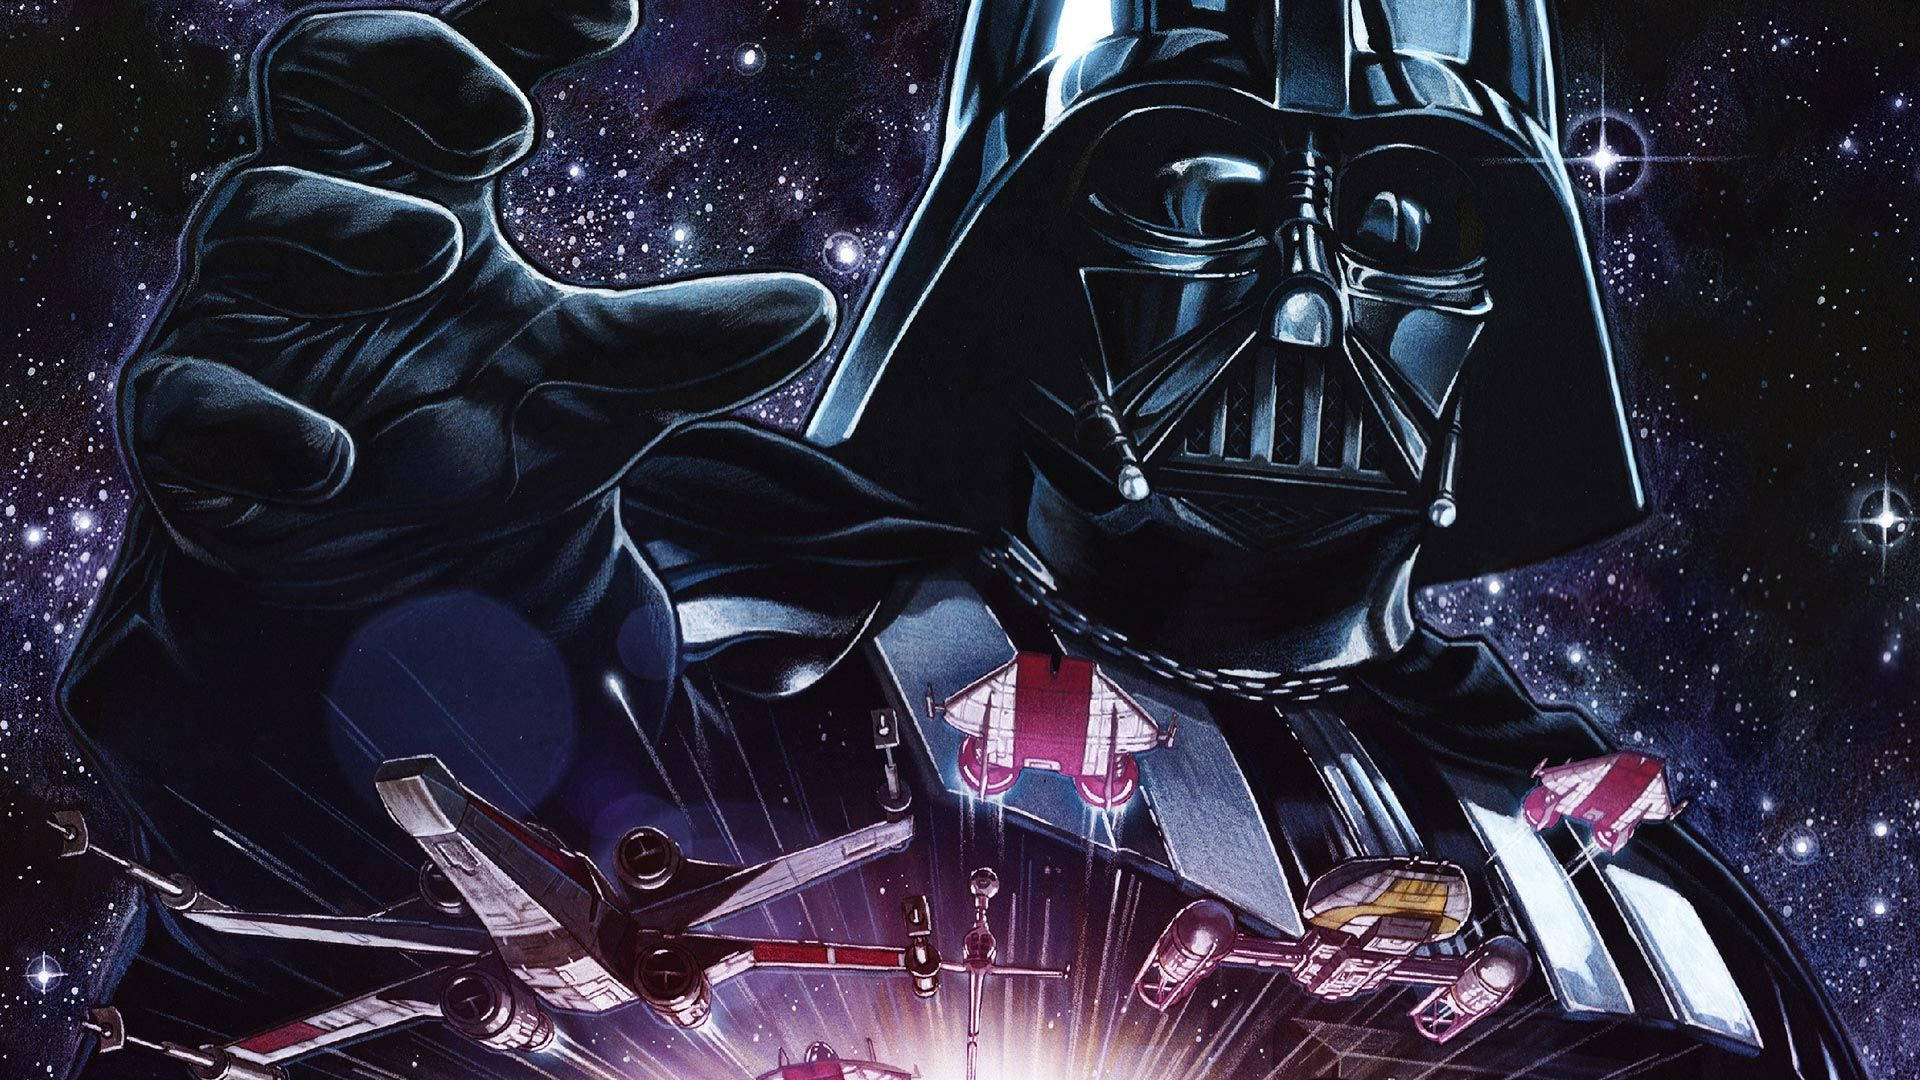 Darth Vader In The Galaxy Background